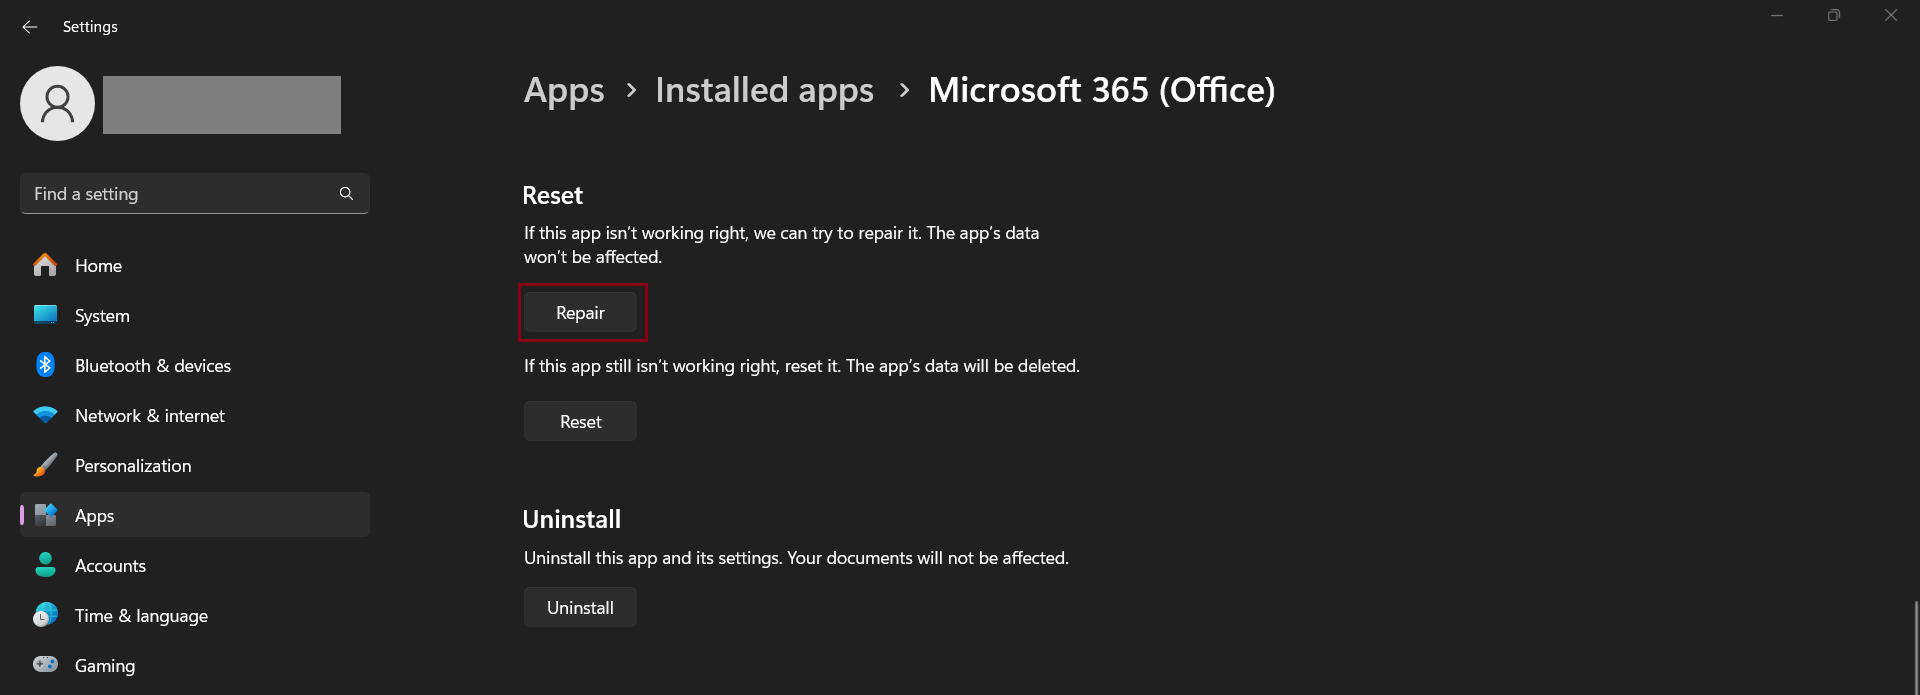 Word-Cannot-Complete-Save-Error-Windows-11-apps-installed-apps-office-repair